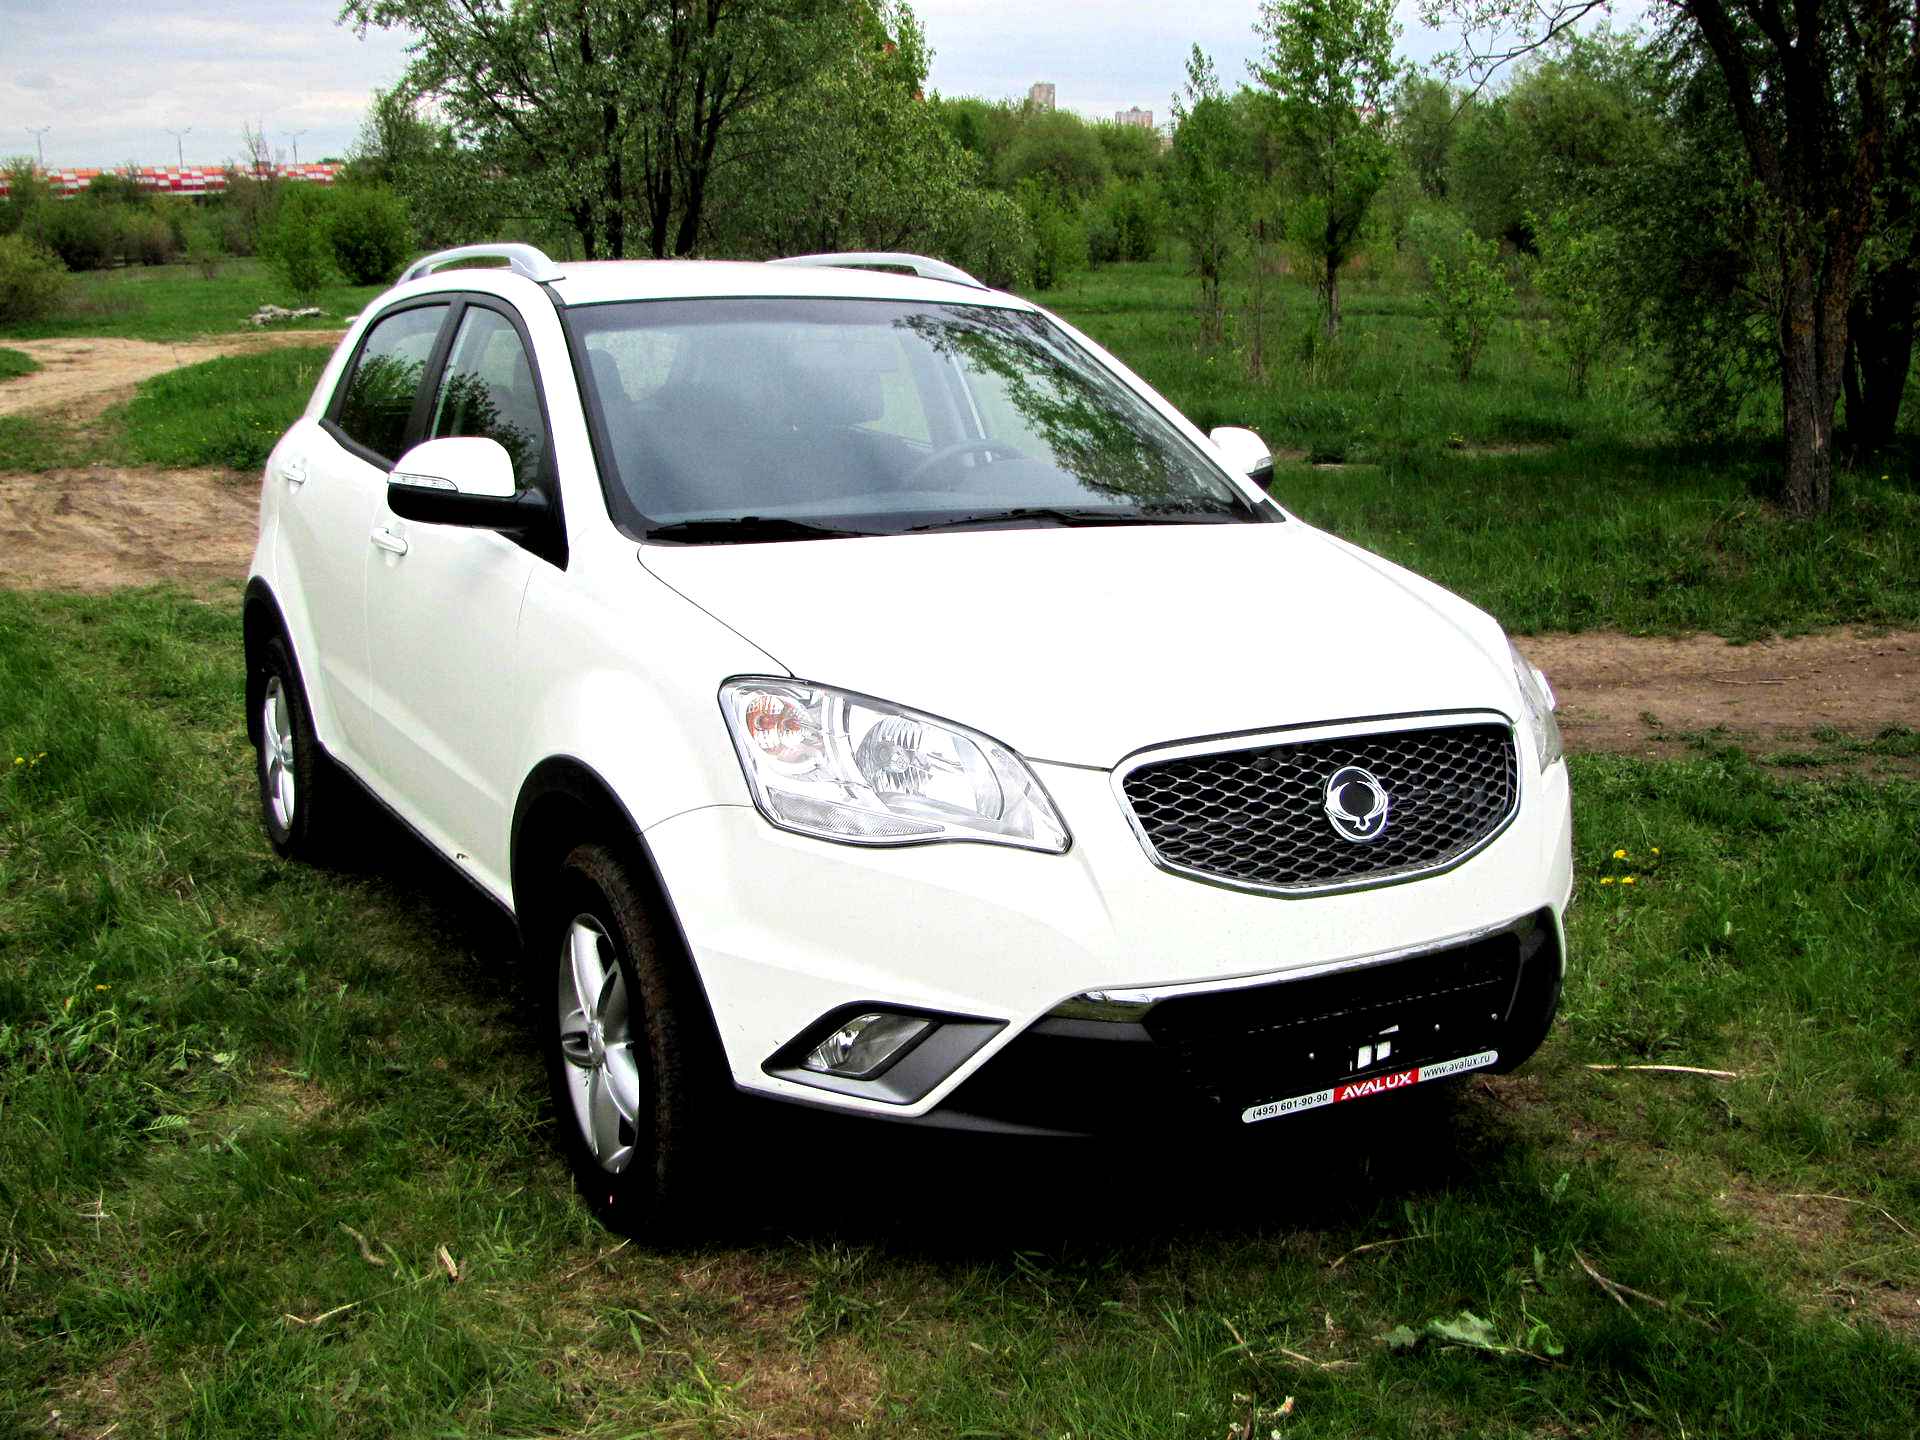 Санг енг форум. SSANGYONG Actyon 2. SSANGYONG Actyon 2011. SSANGYONG Actyon New 2. SSANGYONG Actyon II, 2011.